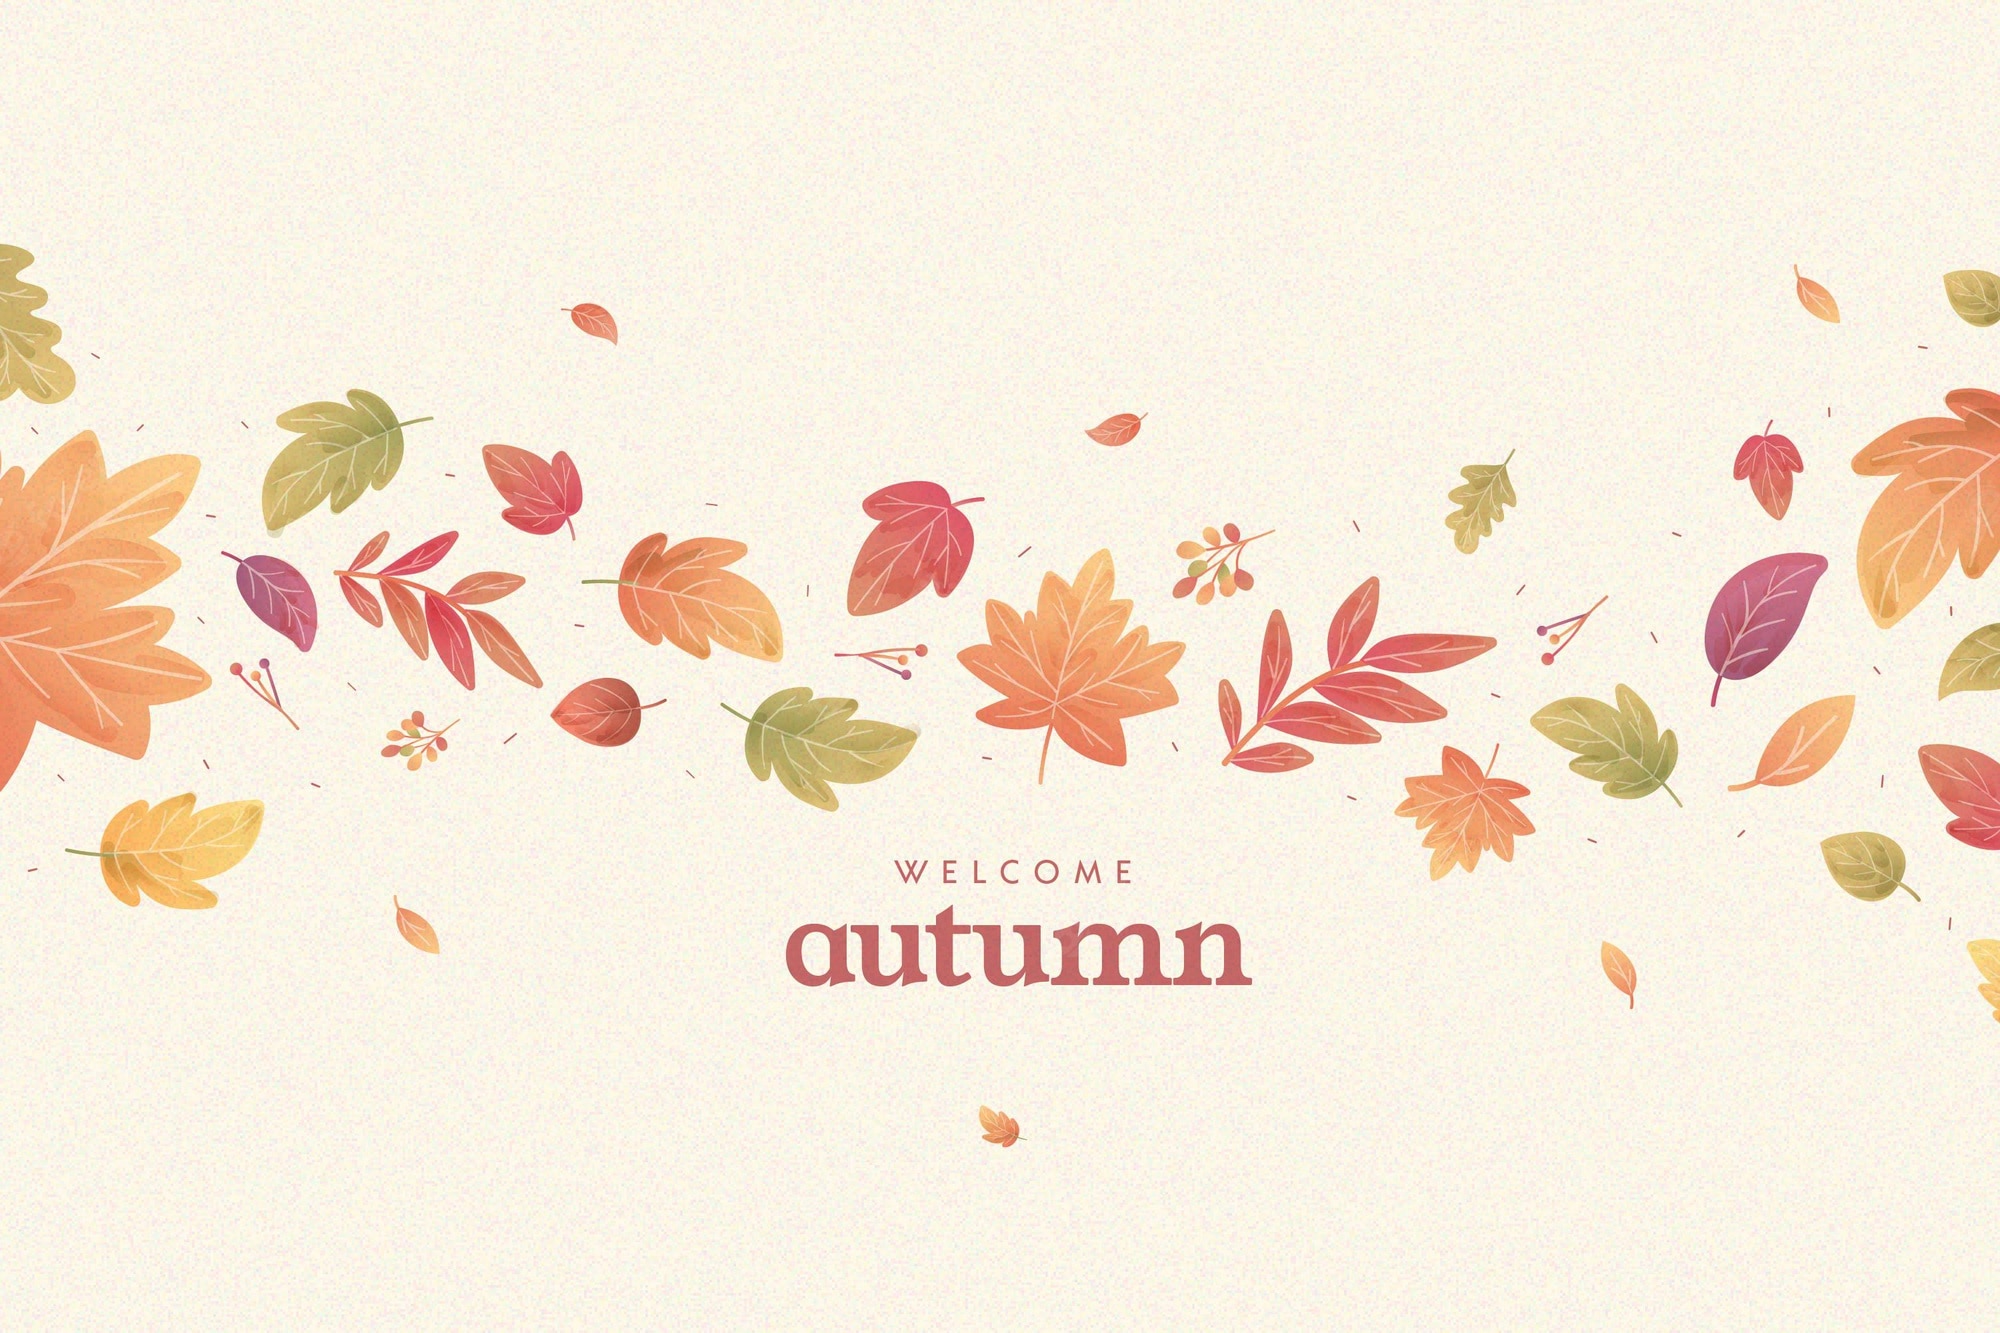 Fall Background Image. Free Vectors, & PSD